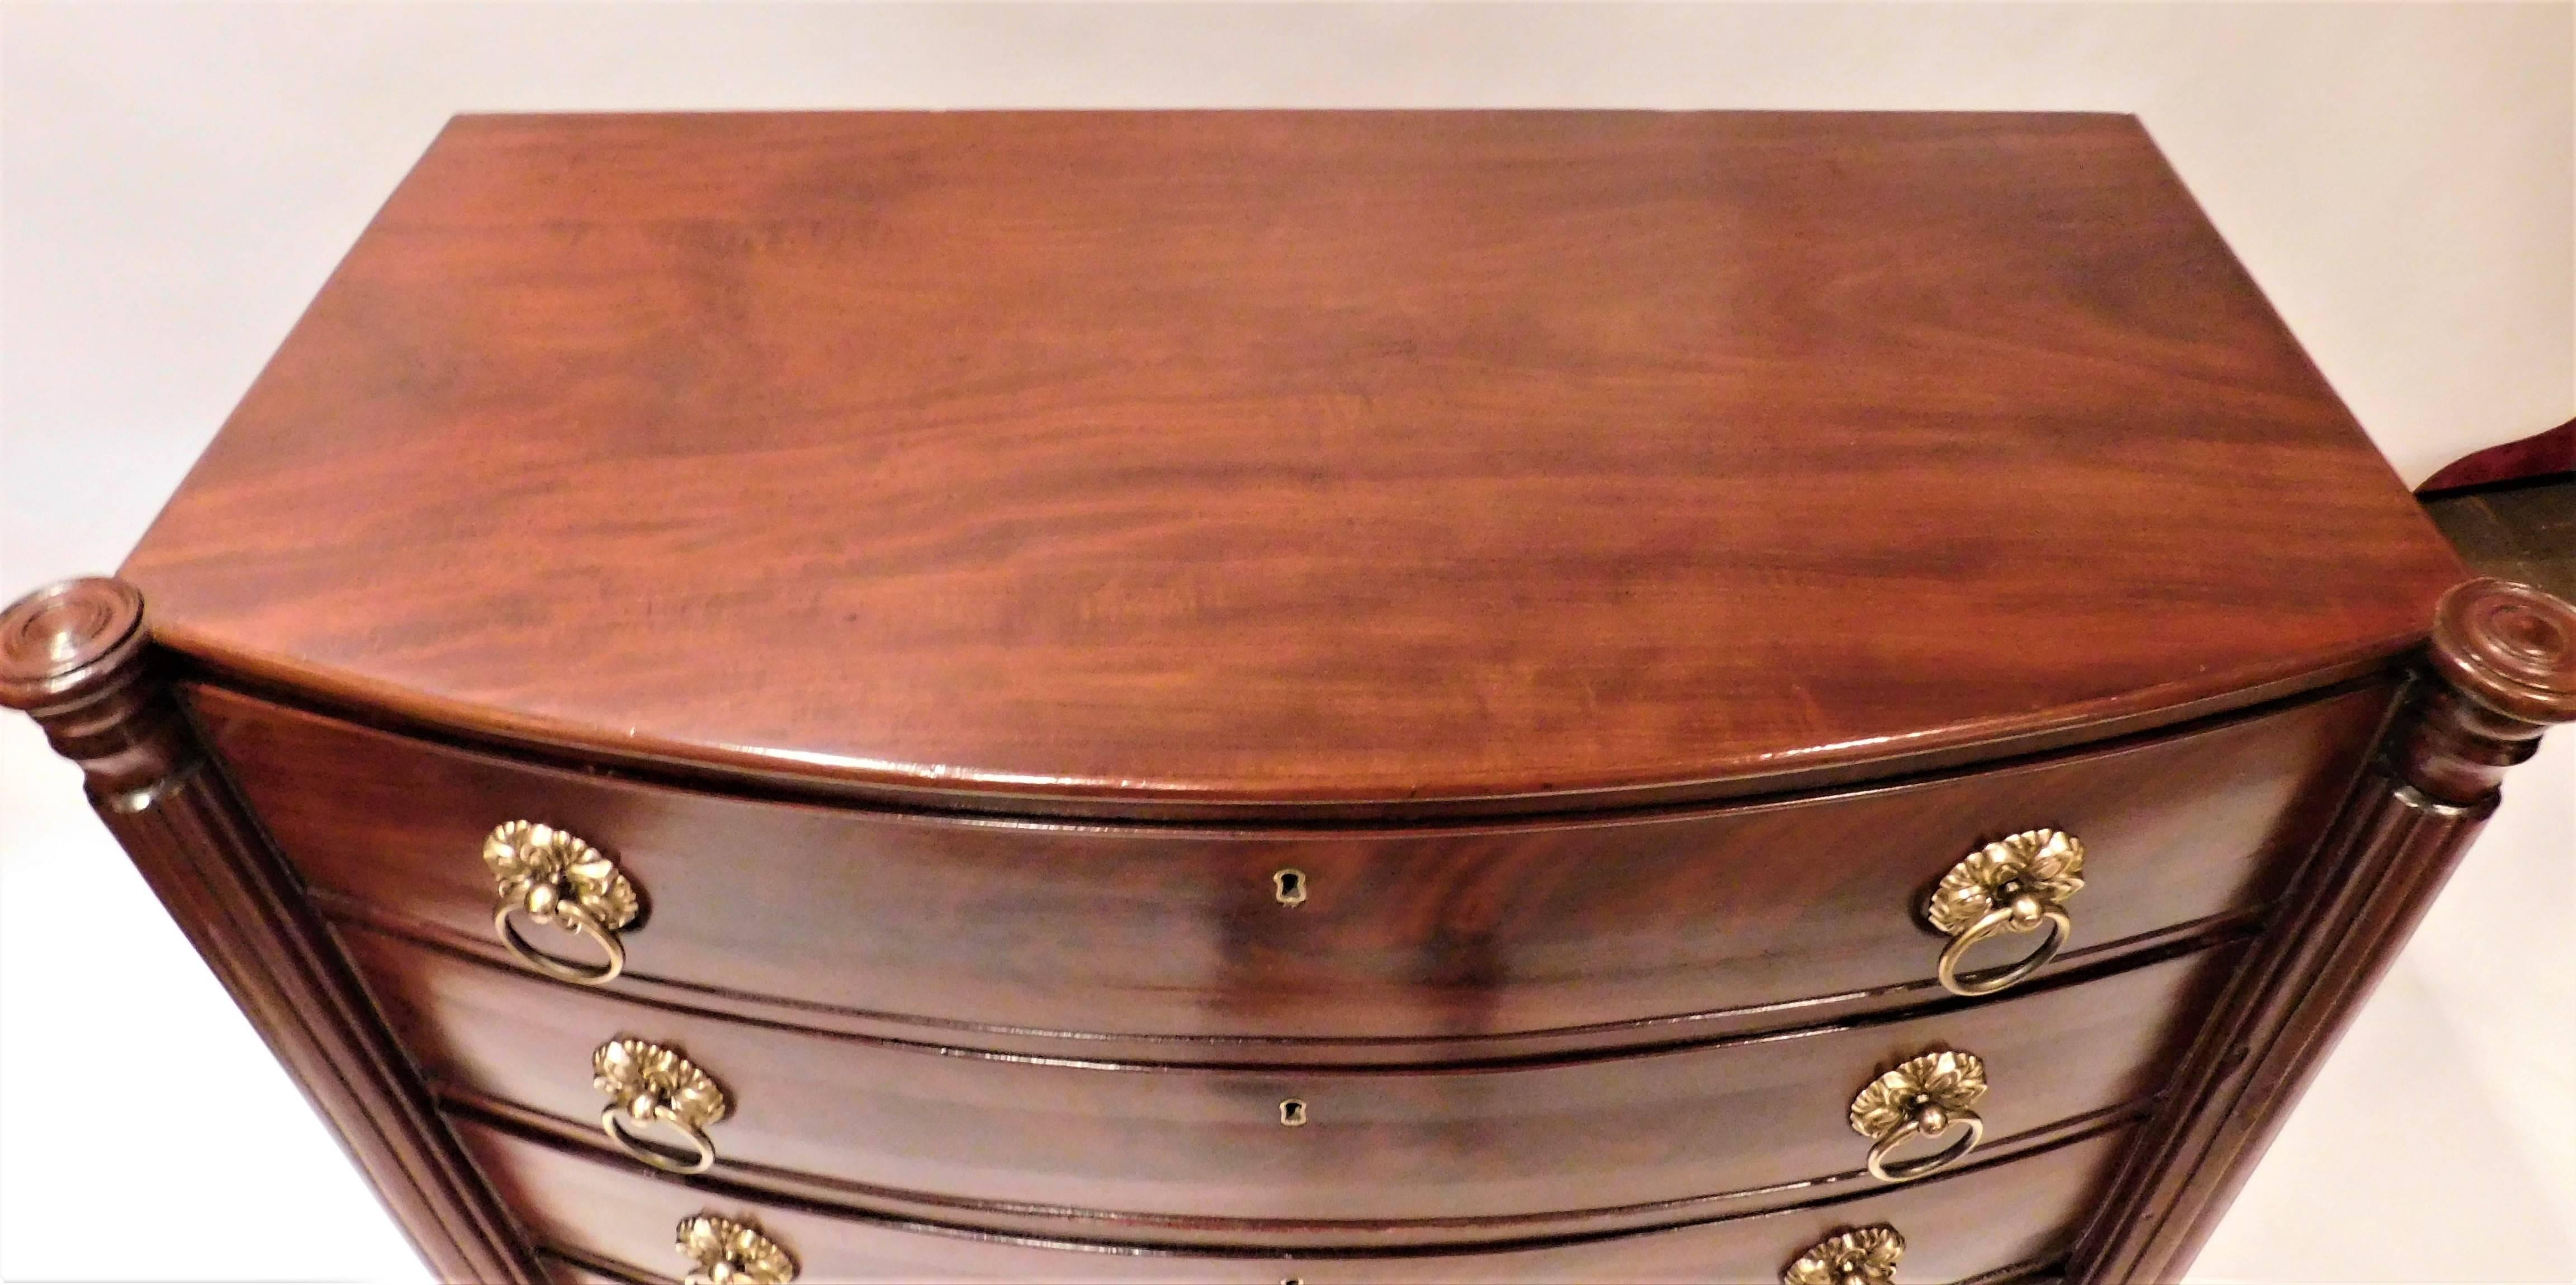 Flame mahogany fronts on the four drawers with mahogany top and case and pine secondary wood. New England, probably Massachusetts, French polish. Solid brass ring pulls. Turned legs. Single board top. Brass escutcheons. Drawers open and close